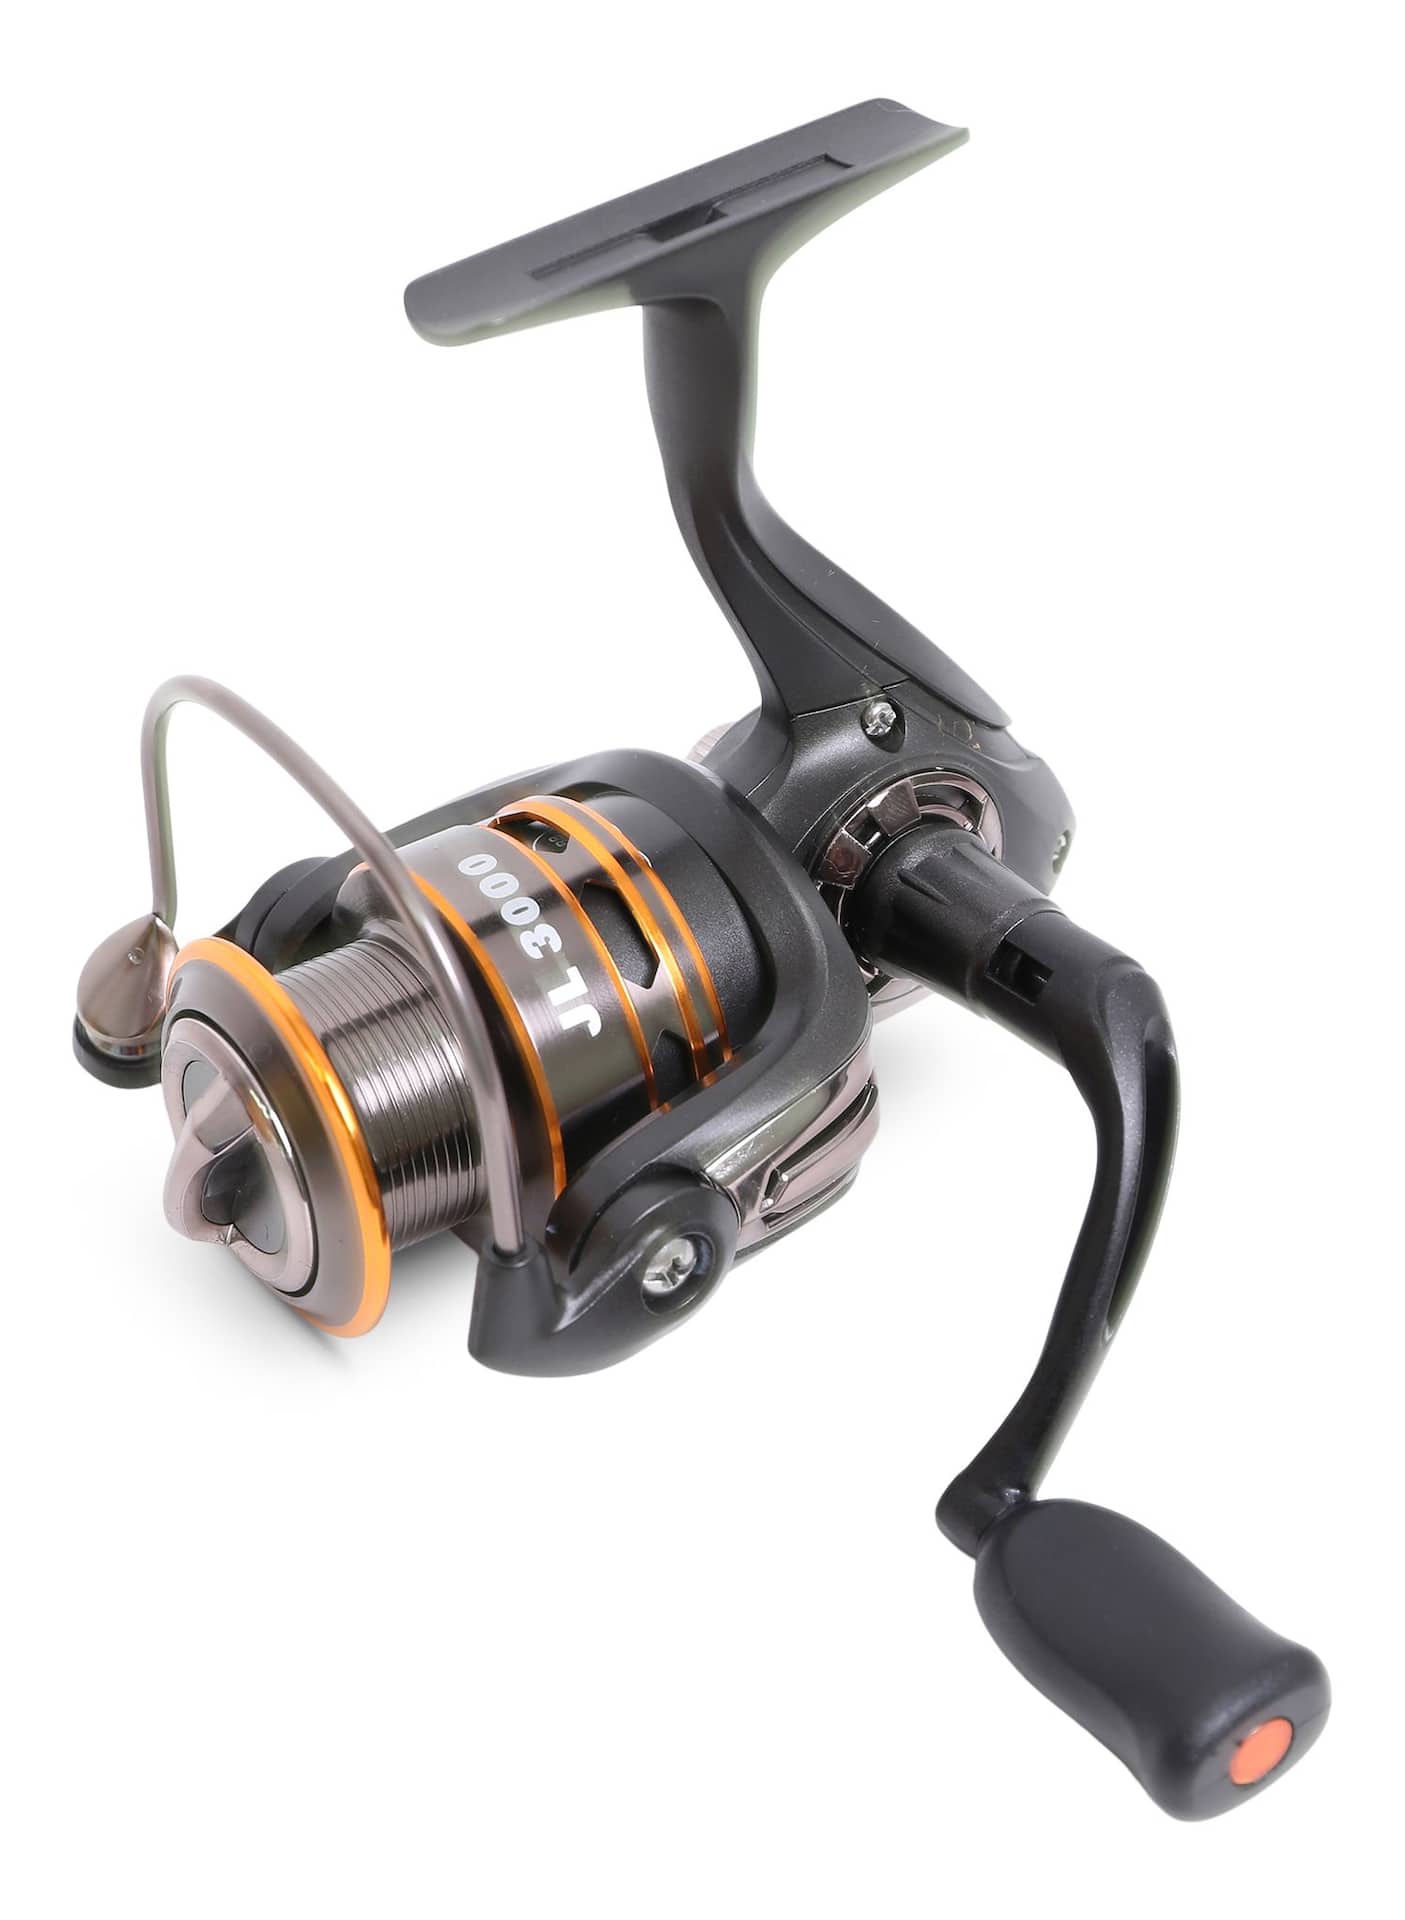 Searching for elusive Ryobi spinning reels. - Reel Talk - ORCA